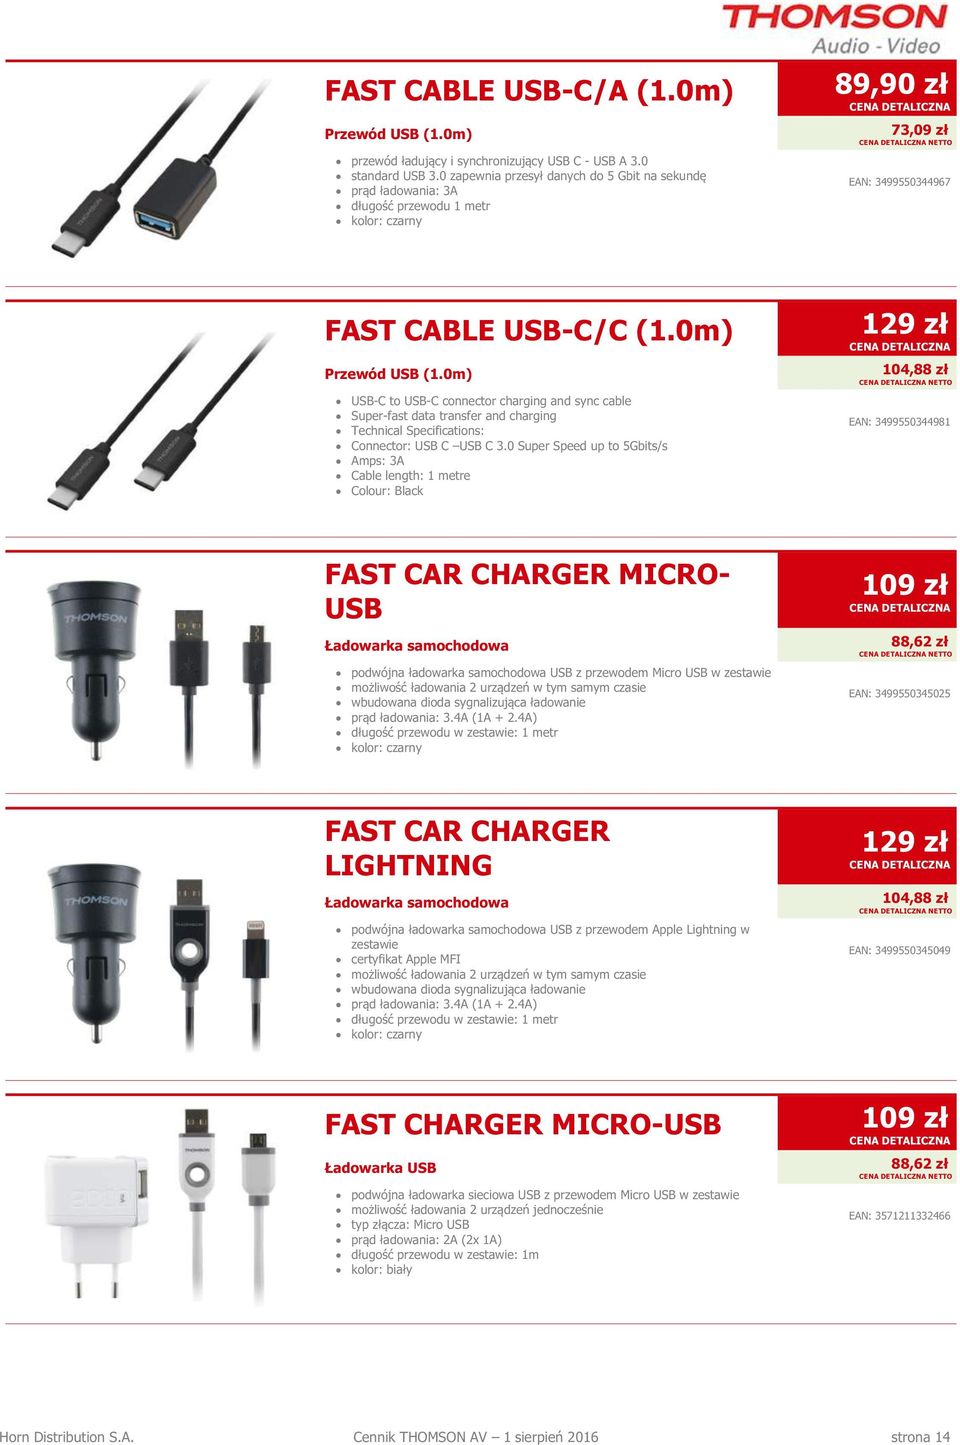 0m) USB-C to USB-C connector charging and sync cable Super-fast data transfer and charging Technical Specifications: Connector: USB C USB C 3.